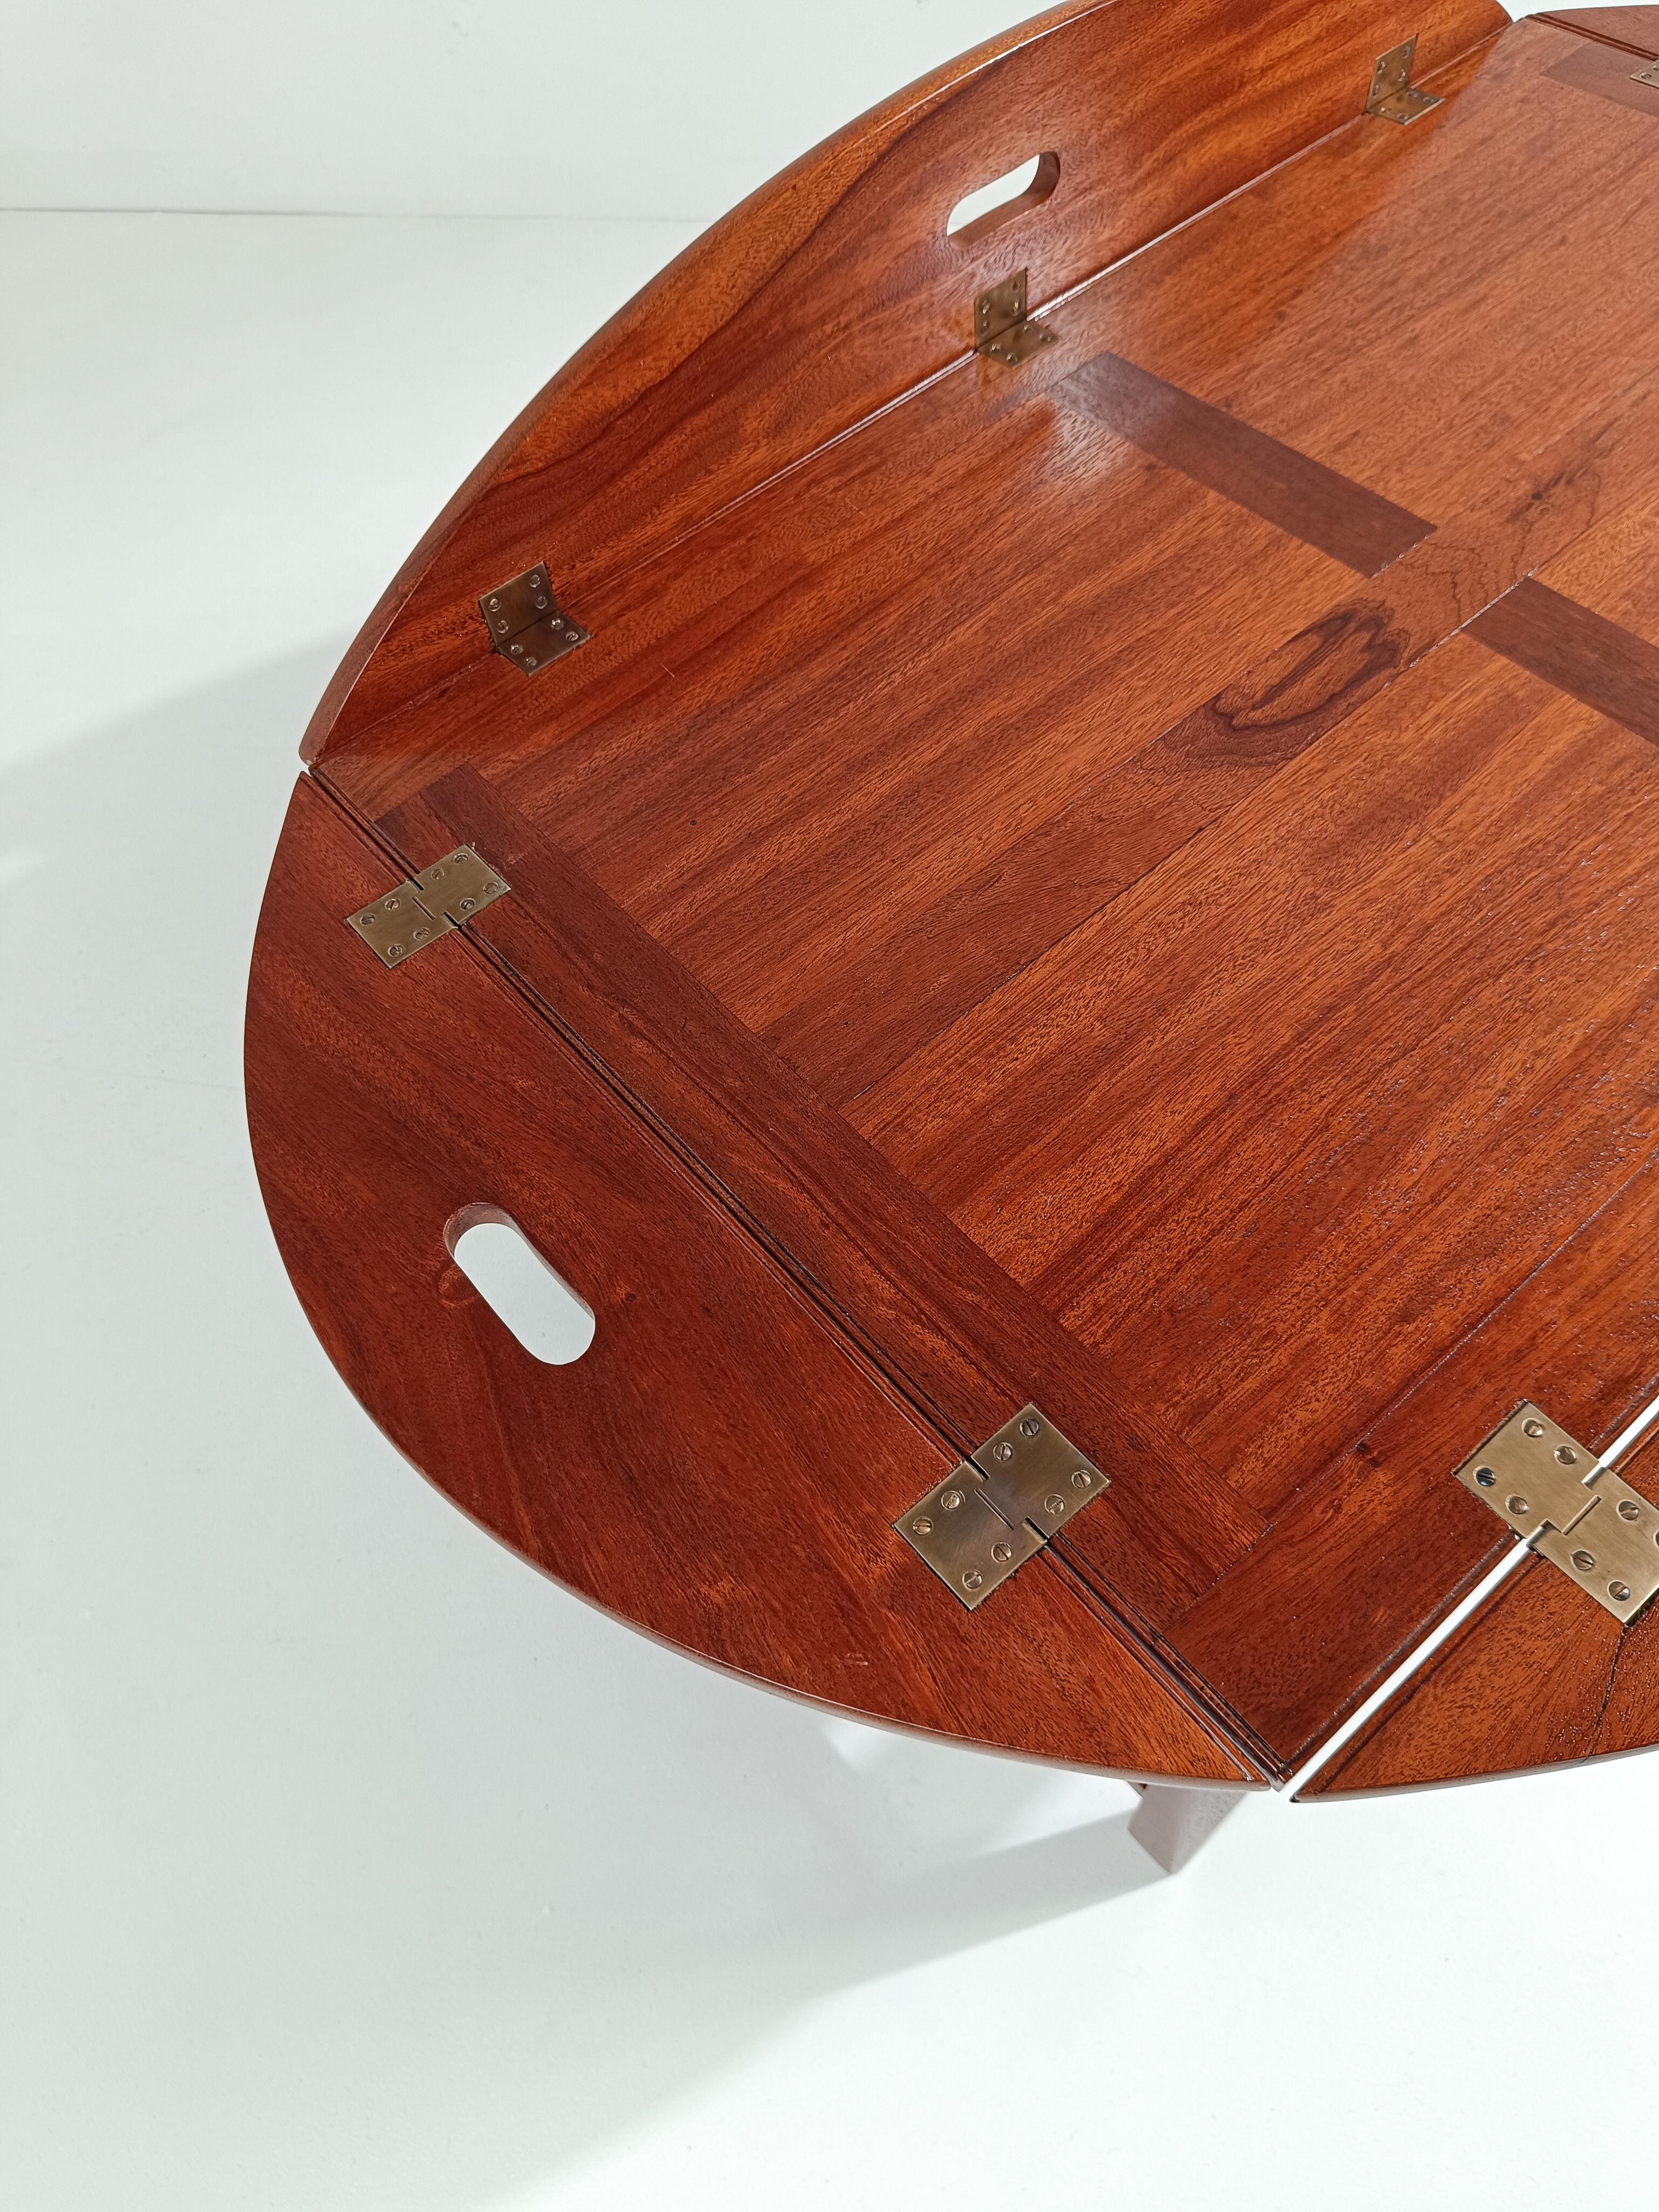 Vintage Oval Mahogany Butler's Coffee Tray Table in Georgian-style, Circa 1960s For Sale 15